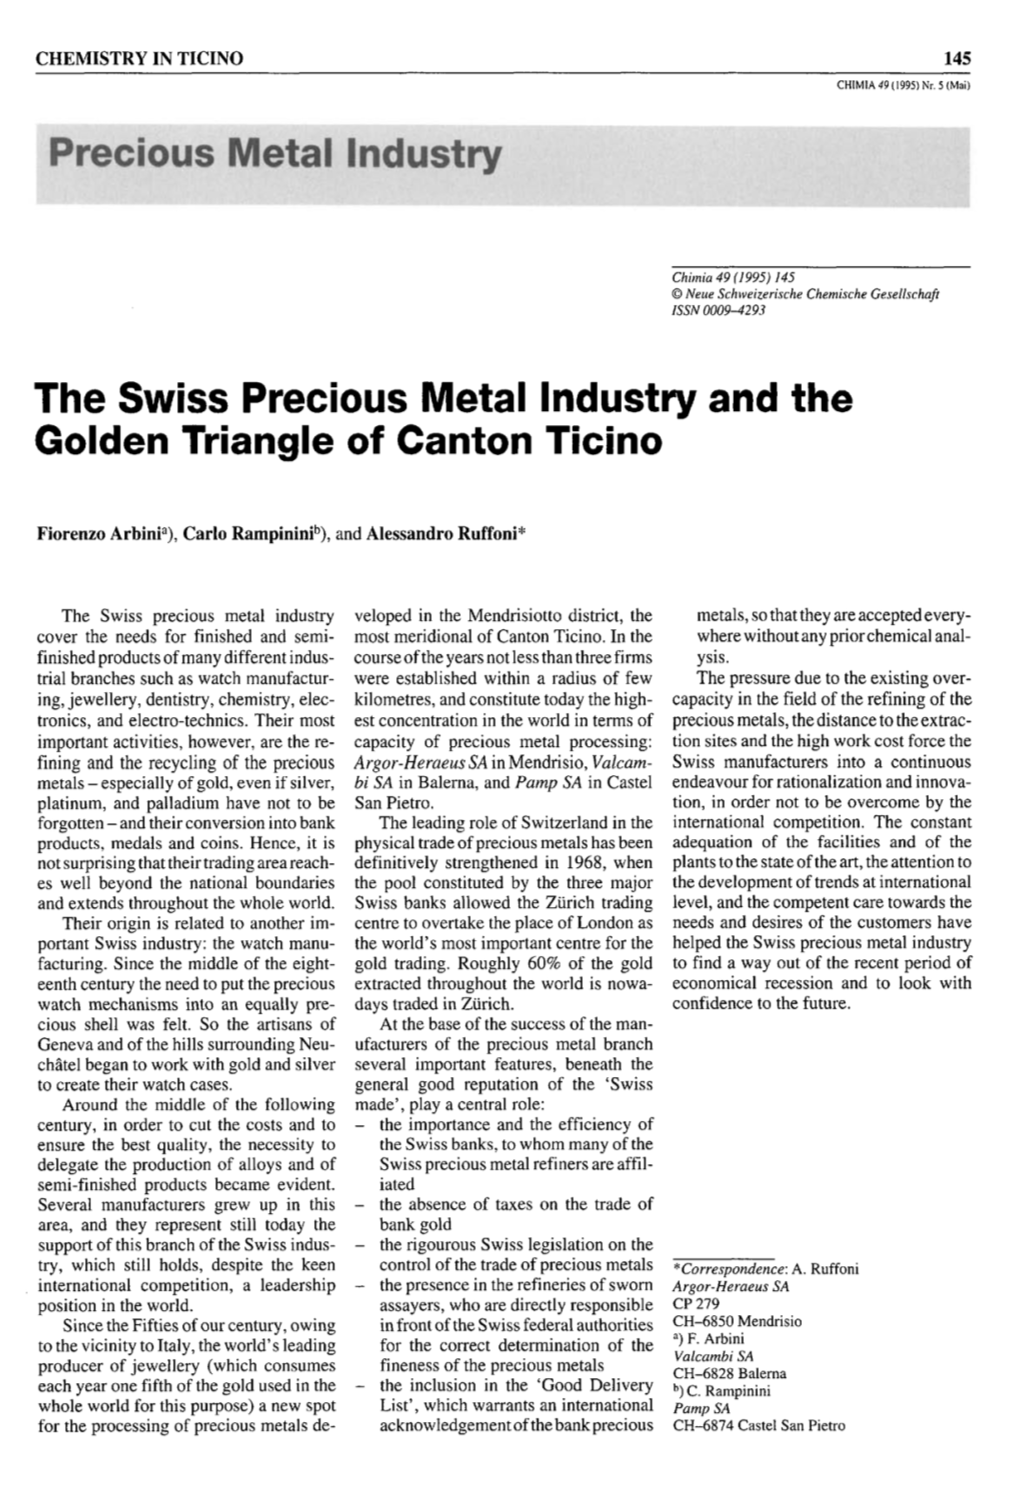 The Swiss Precious Metal Industry and the Golden Triangle of Canton Tieino